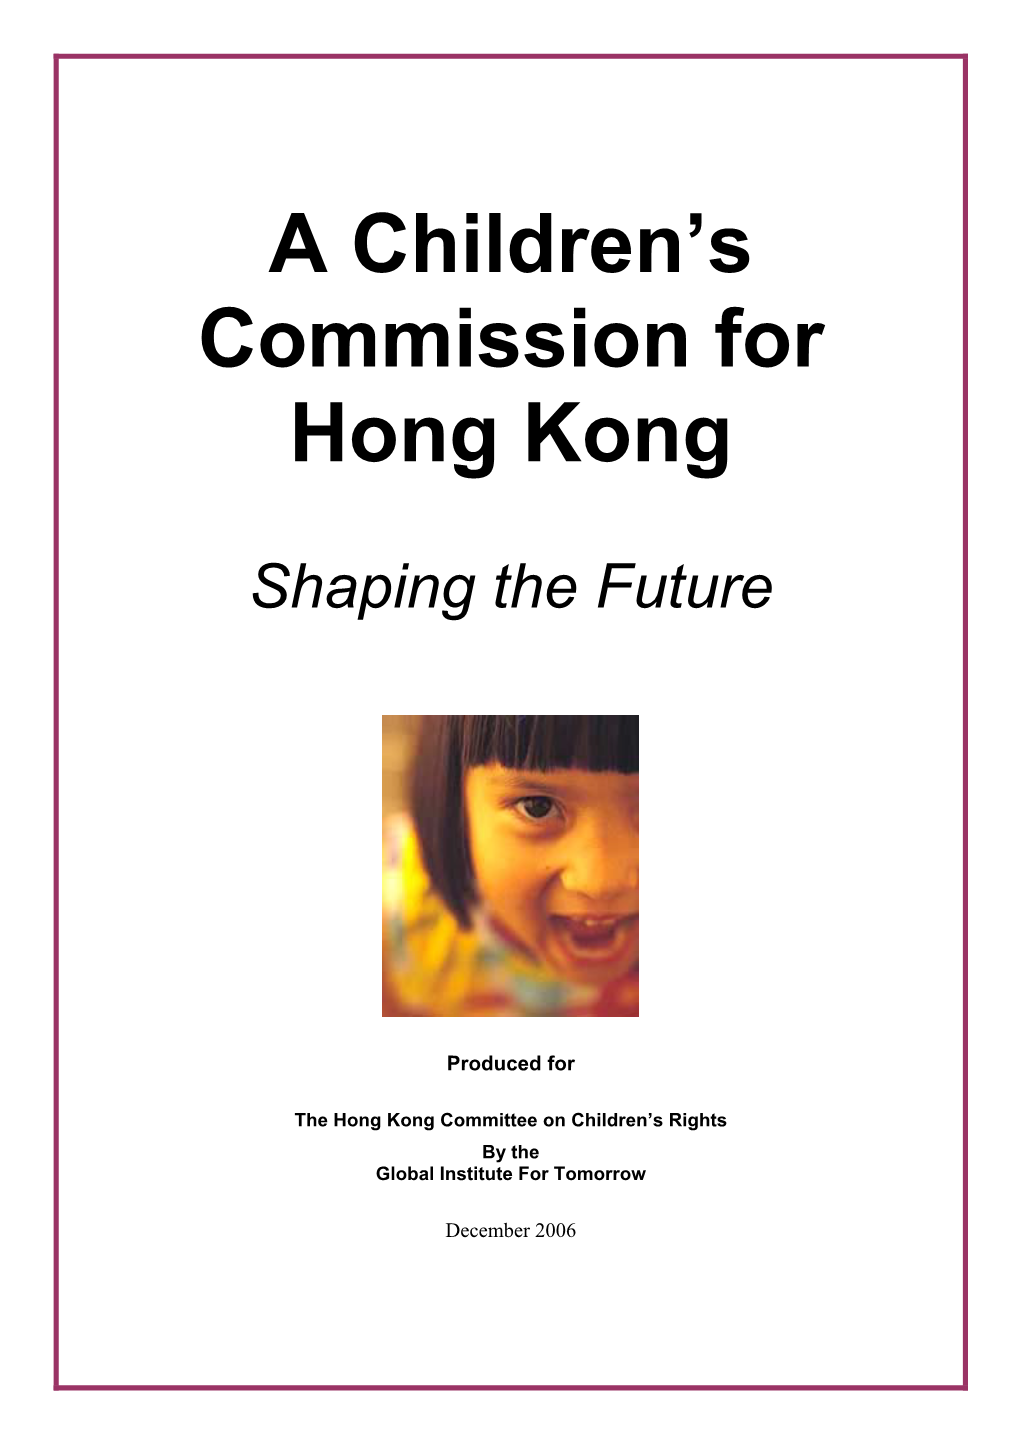 A Children's Commission for Hong Kong